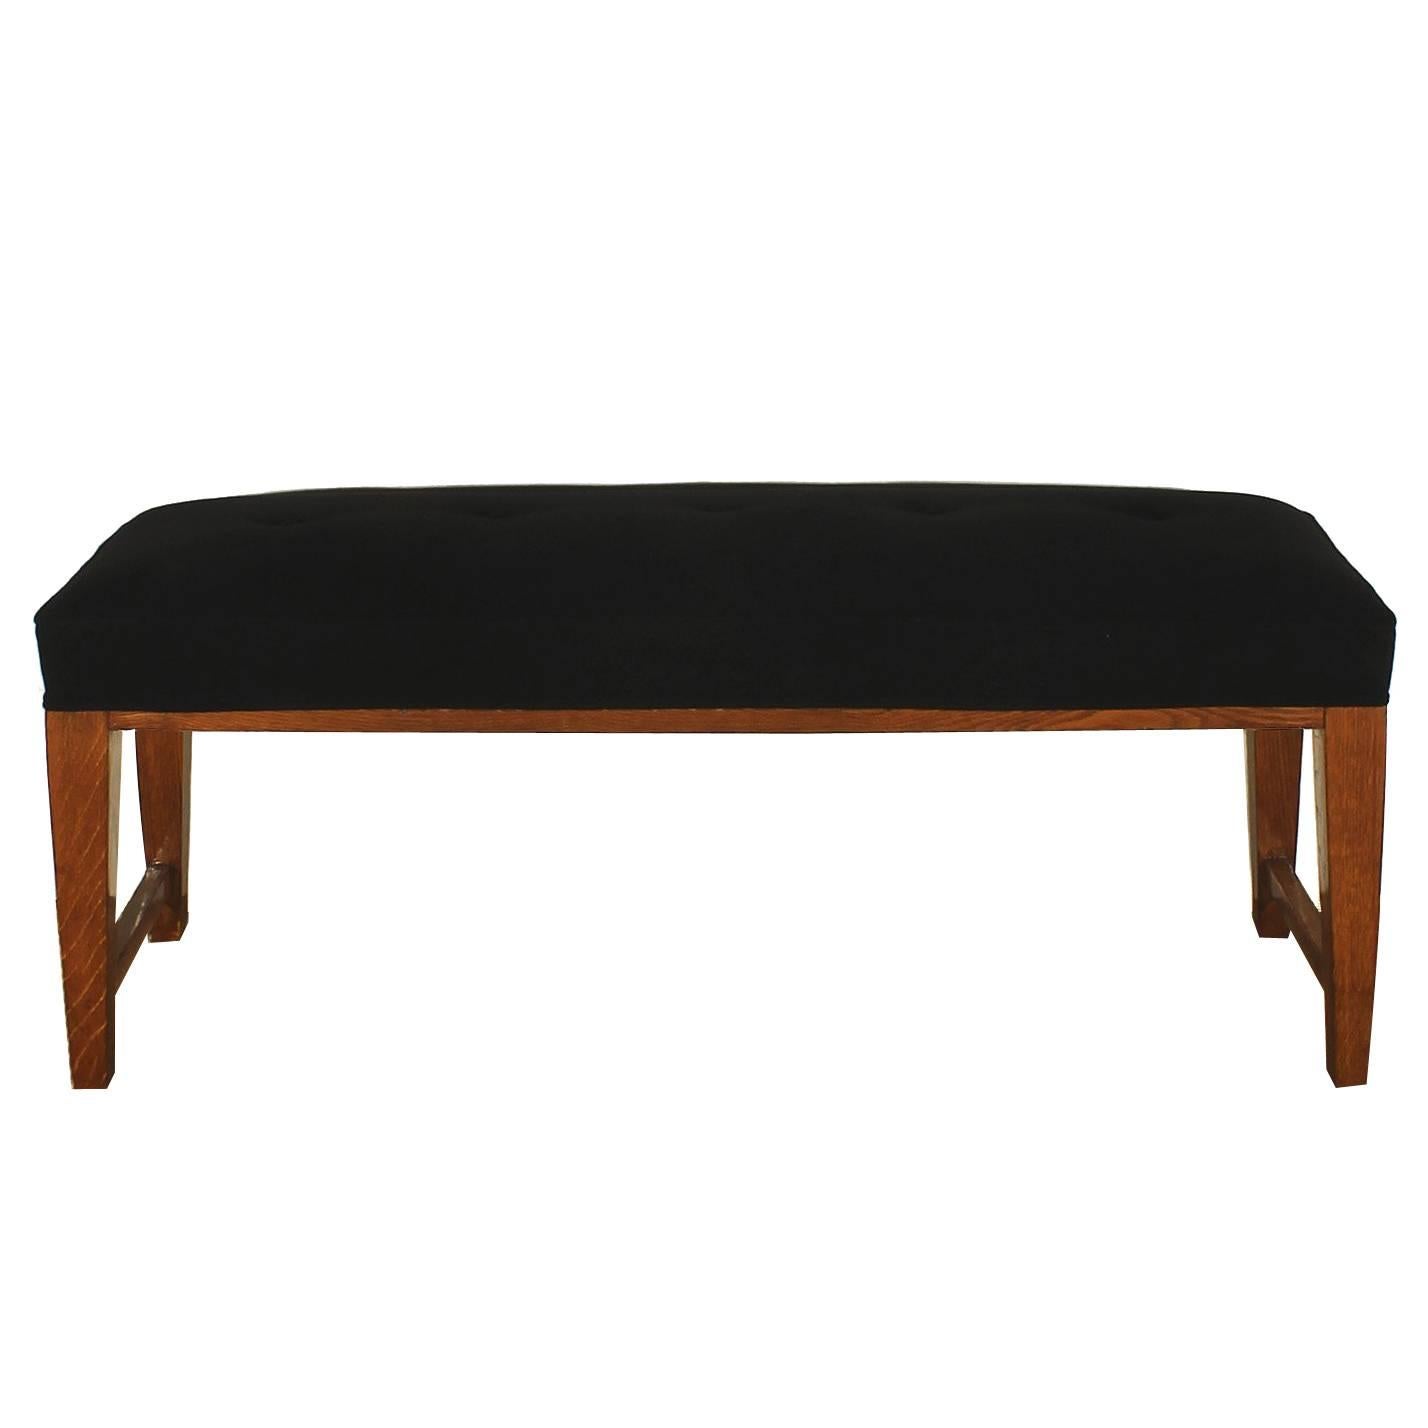 French Bench from the 1940s